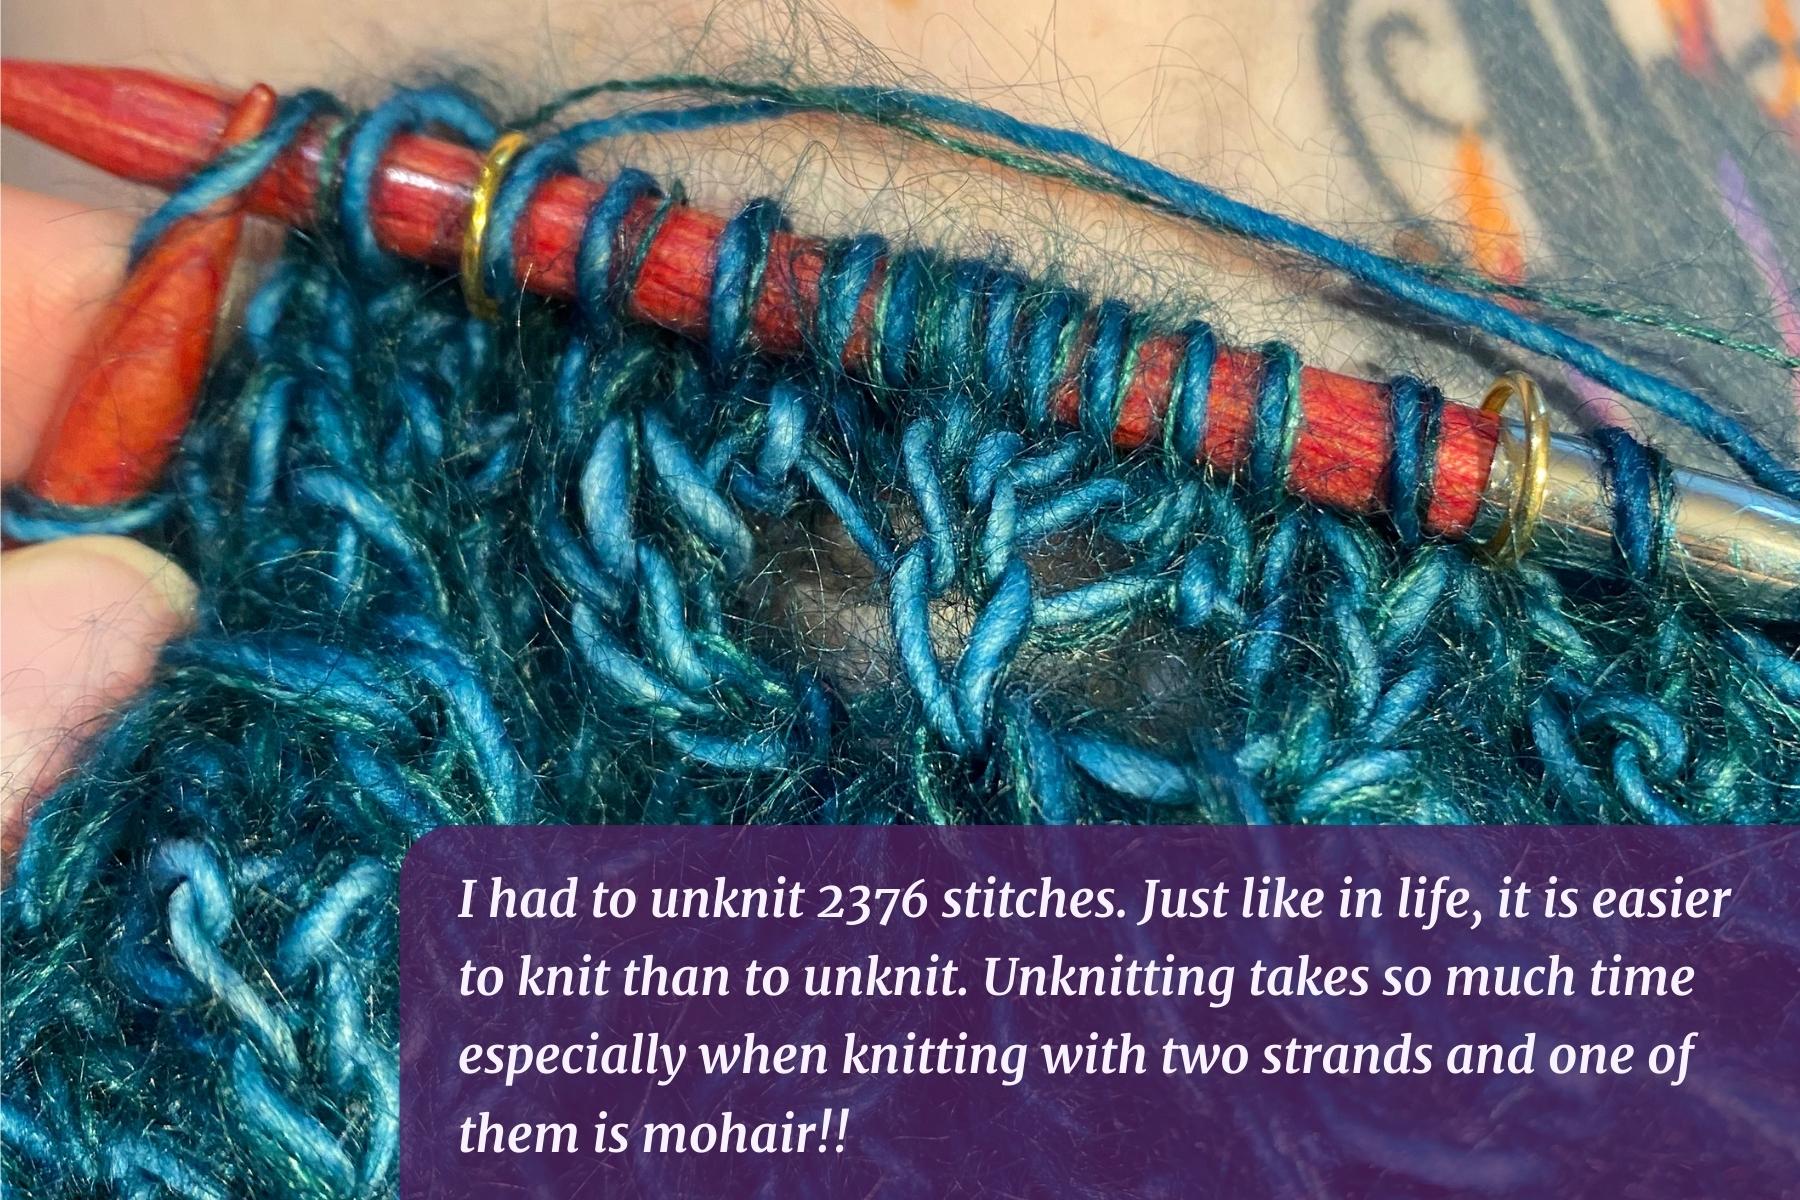 I had to unknit 2376 stitches. Just like in life, it is easier to knit than to unknit. Unknitting takes so much time especially when knitting with two strands and one of them is mohair!!